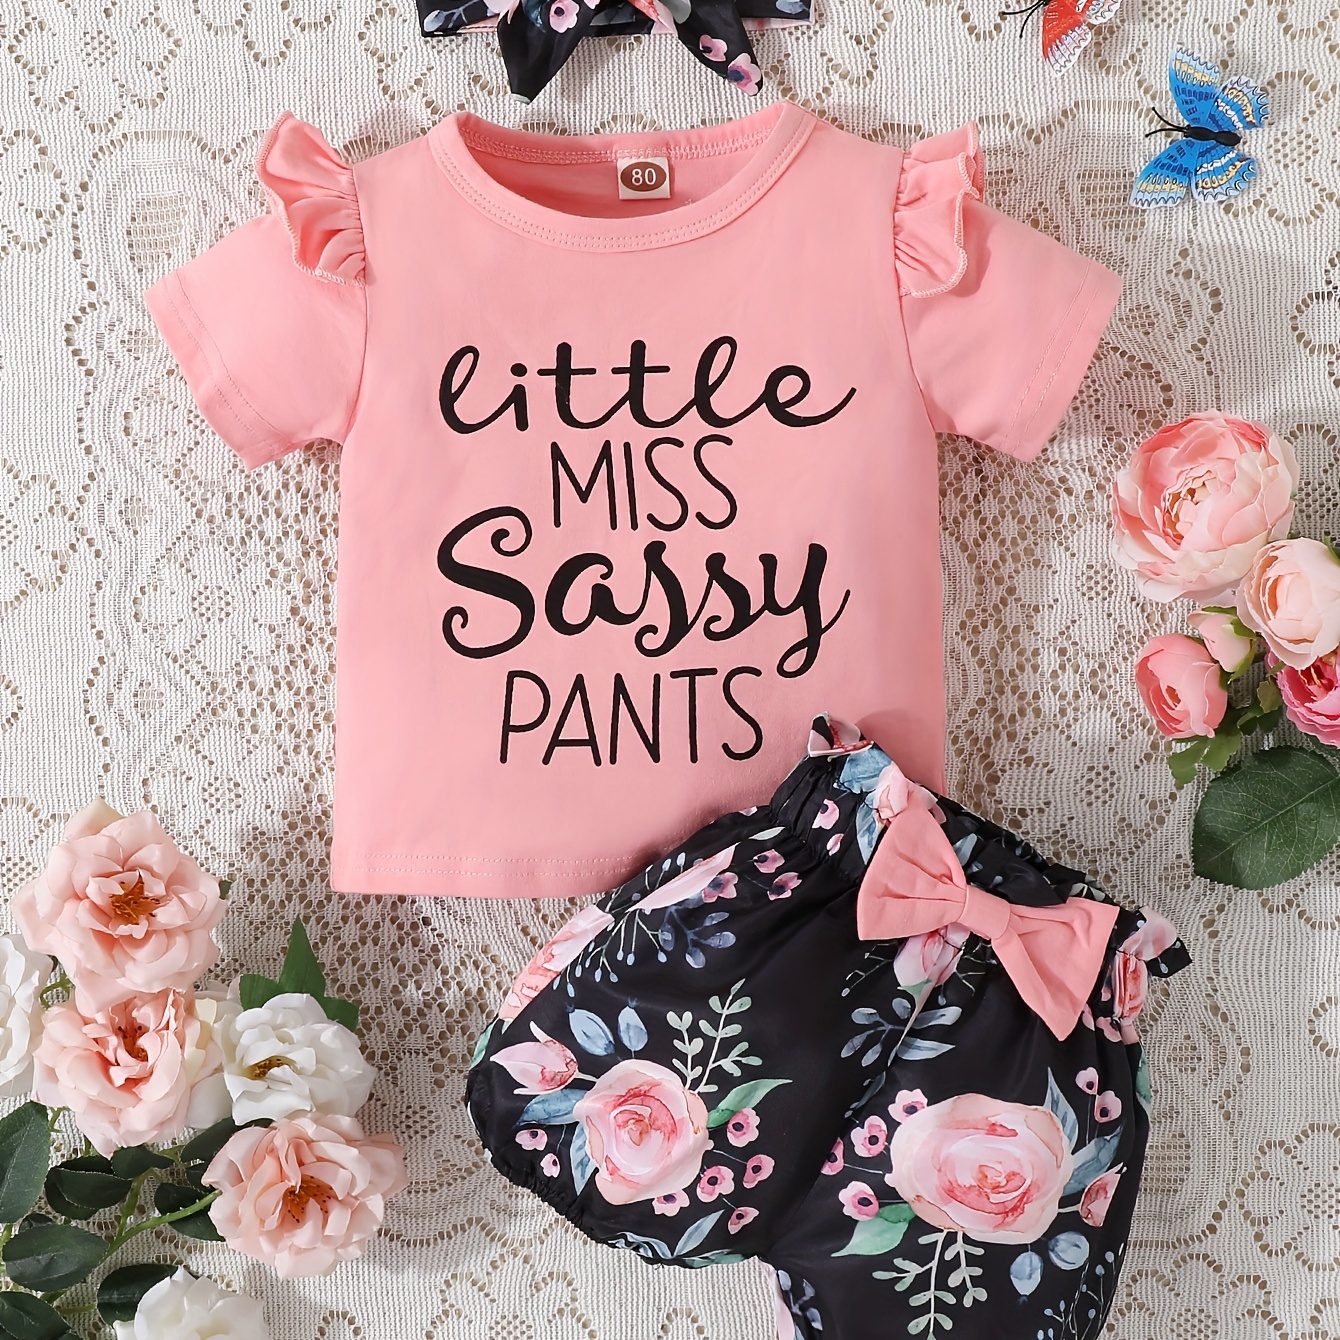 

2pcs Toddler's "little Miss Sassy Pants" Print Summer Outfit, T-shirt & Floral Pattern Shorts, Baby Girl's Clothes